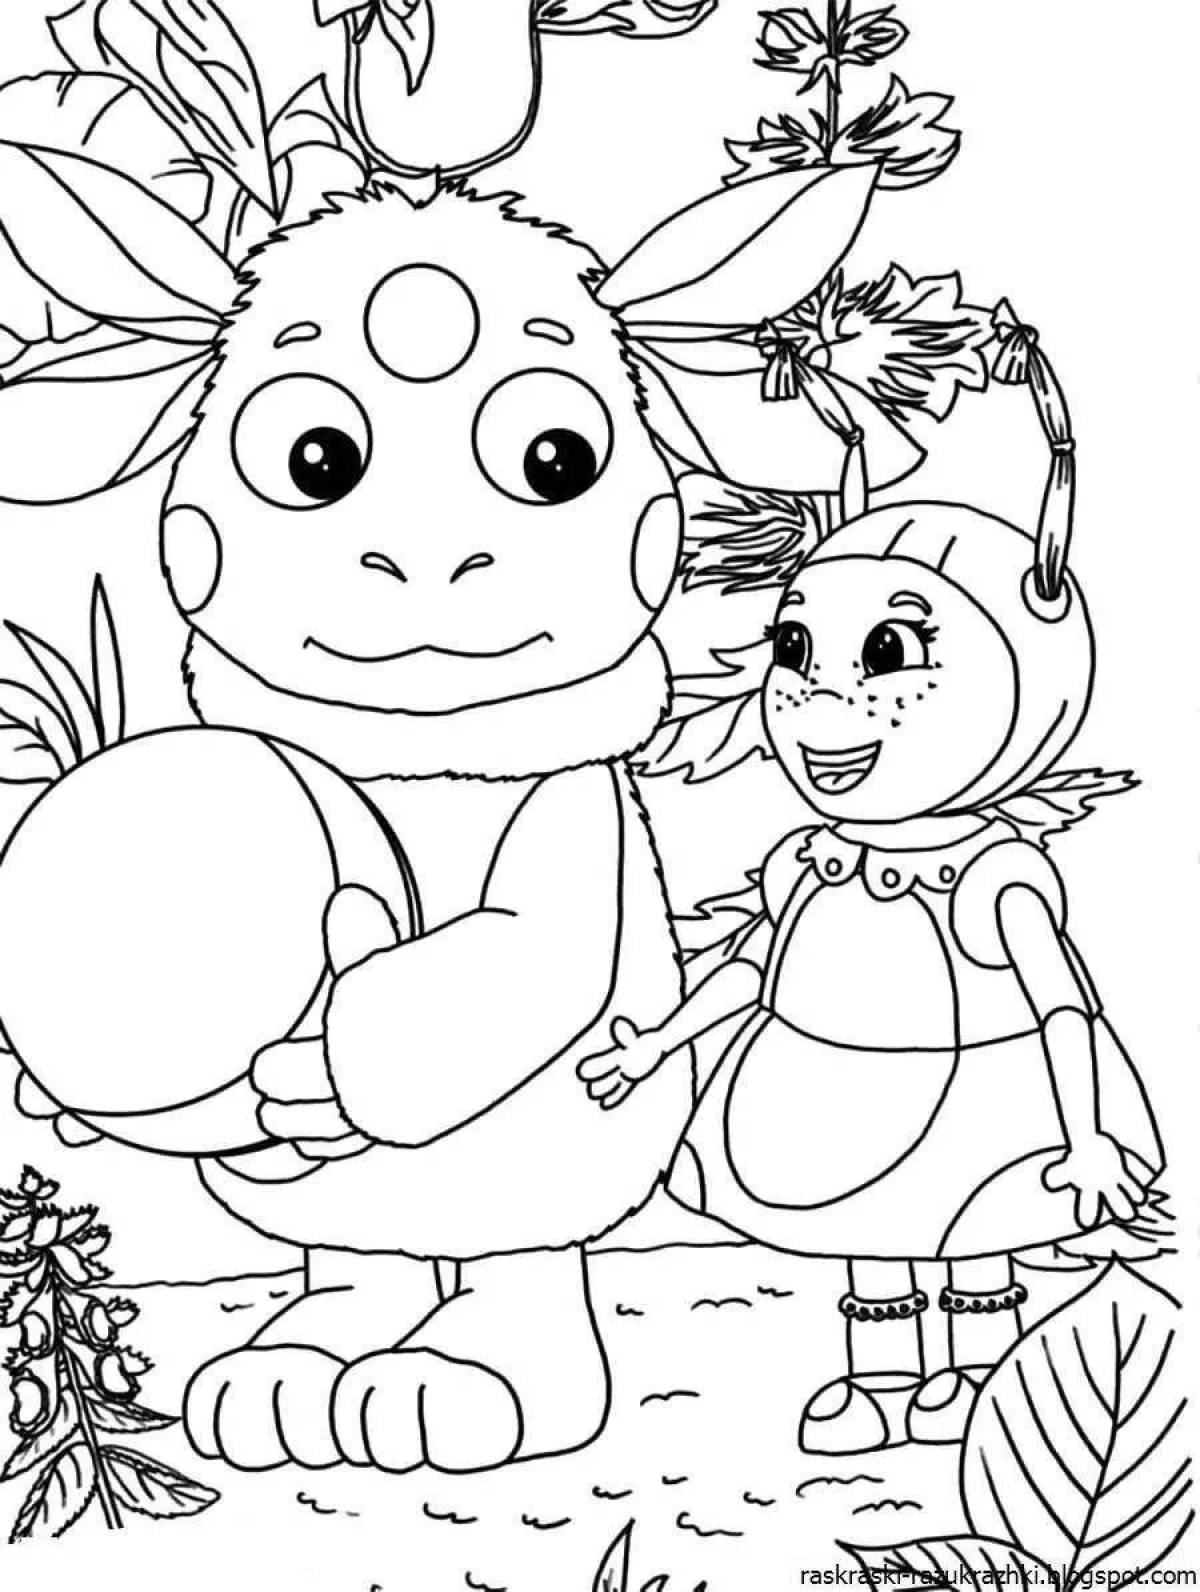 Adorable cartoon coloring book for 4 year olds